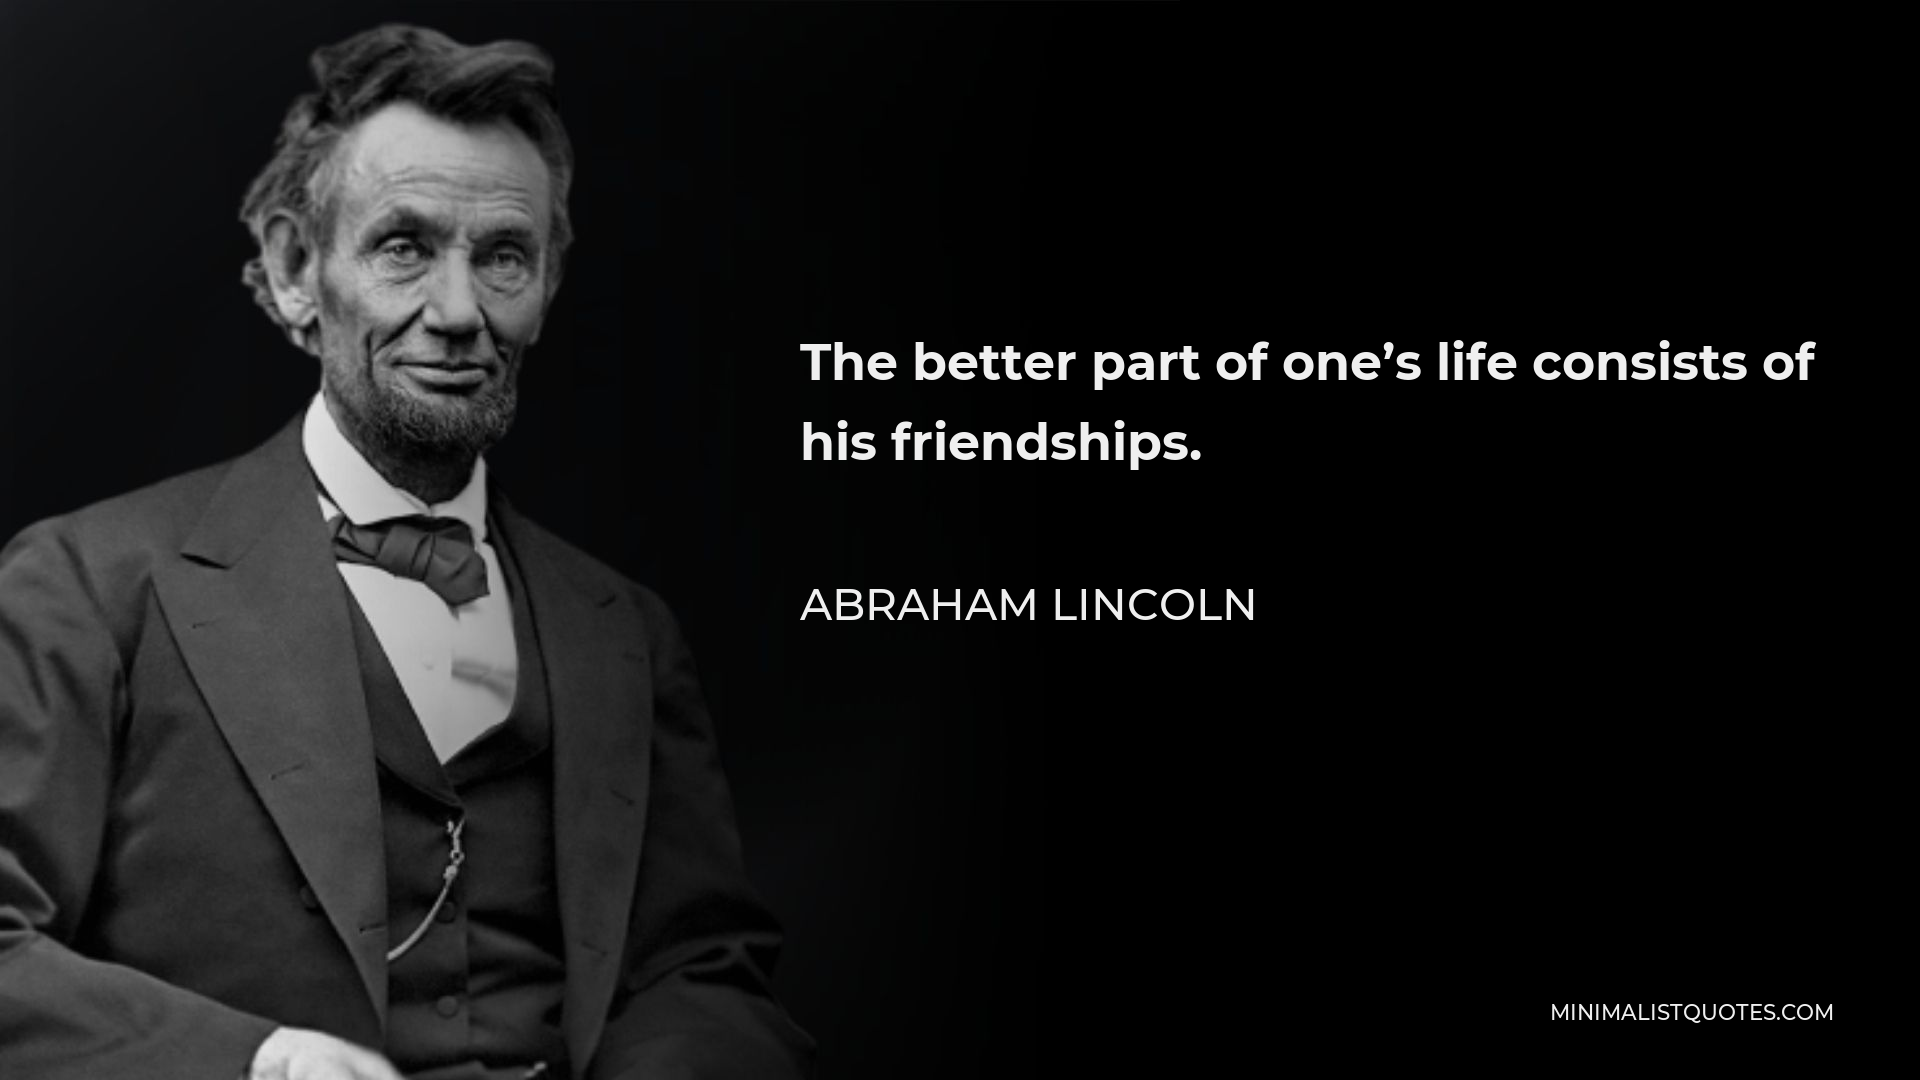 Abraham Lincoln Quote - The better part of one’s life consists of his friendships.